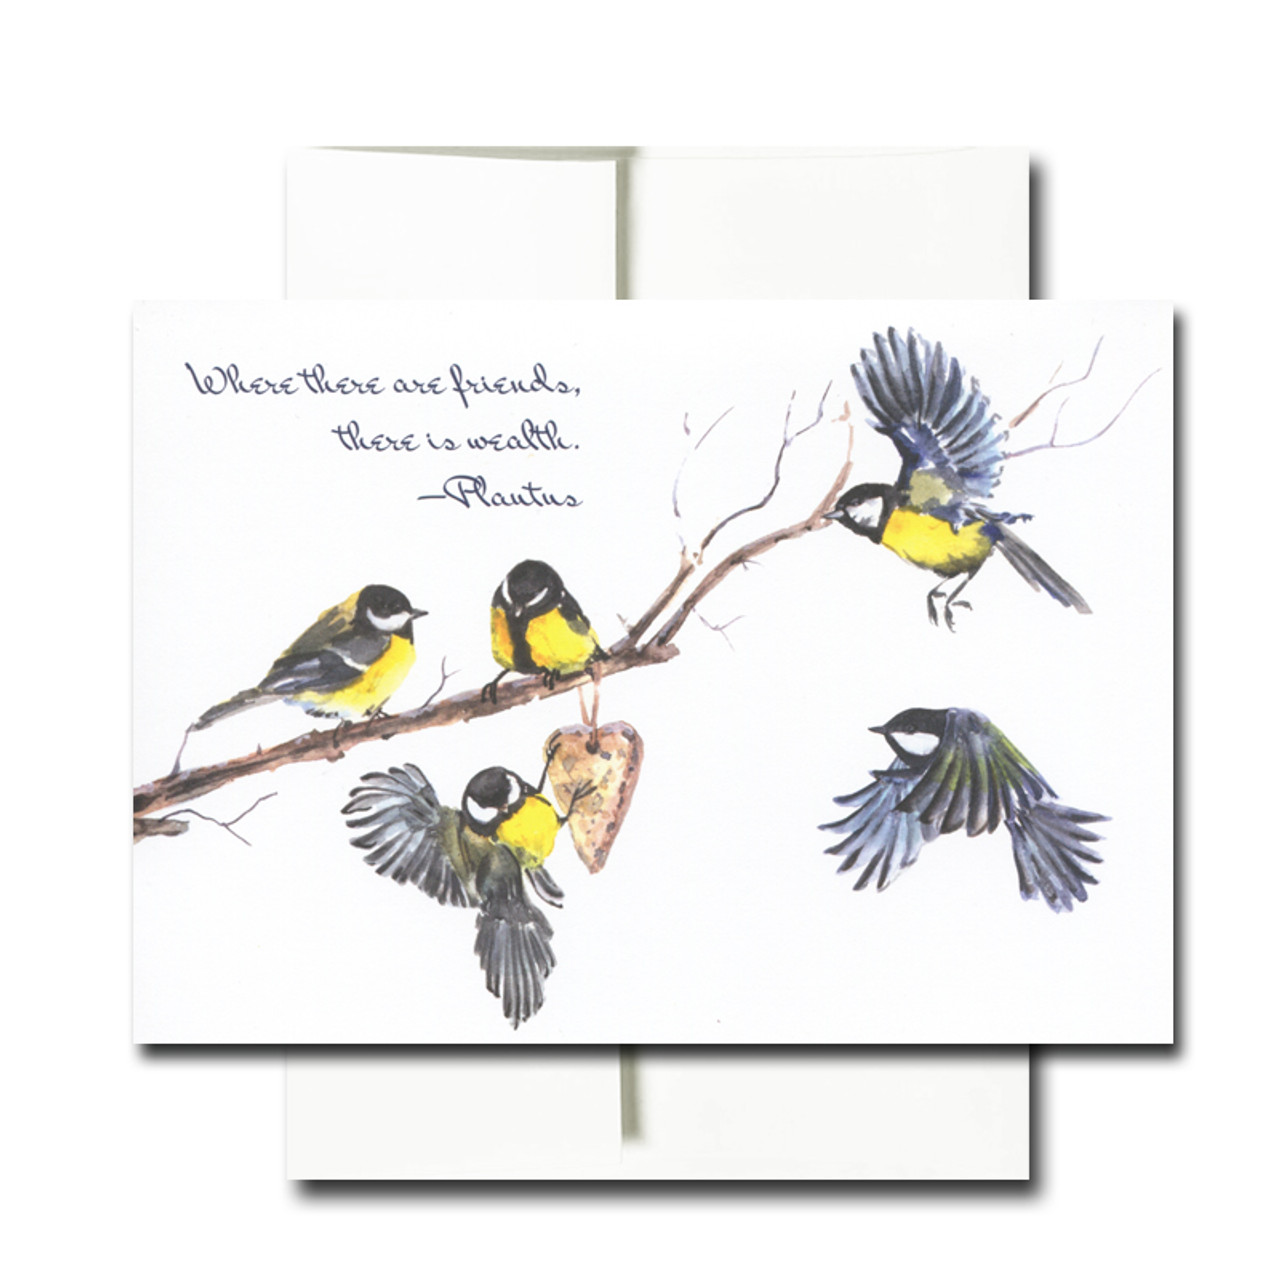 Thinking of You Note Card has a watercolor illustration of a small birds on a branch and the quote: Where there are friends, there is wealth